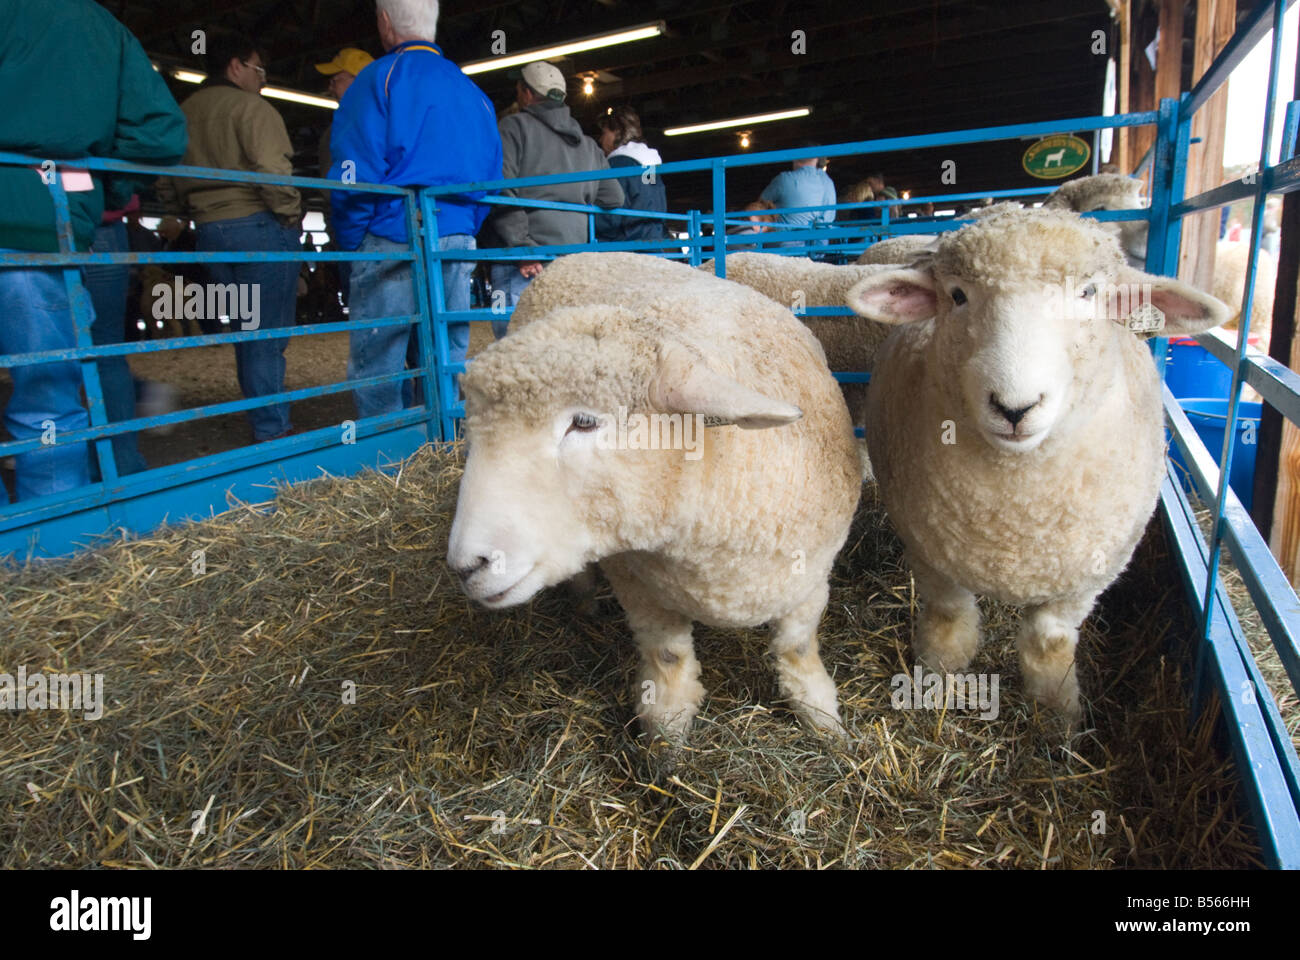 Romney Sheep at the annual Sheep and Wool Festival in Rhinebeck New York Stock Photo